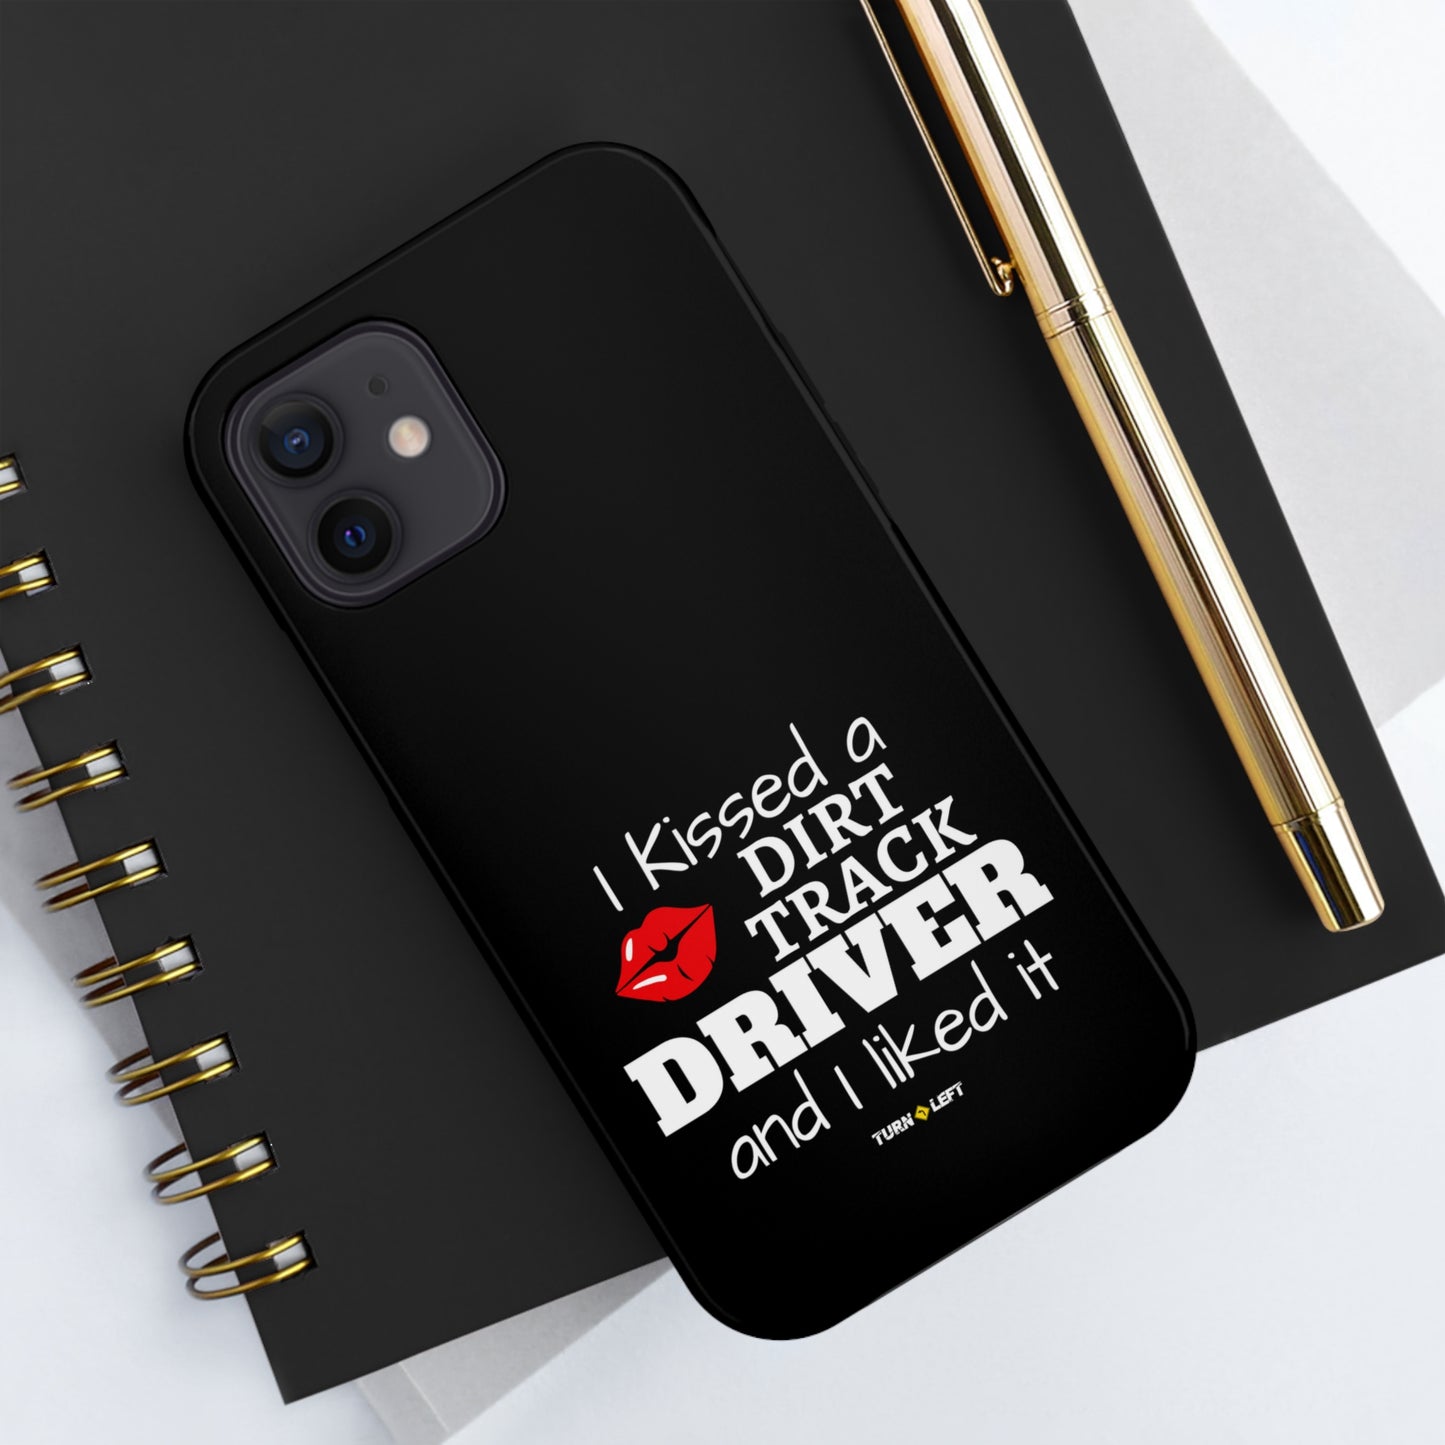 I Kissed A Dirt Track Driver And I Liked It Tough Phone Cases